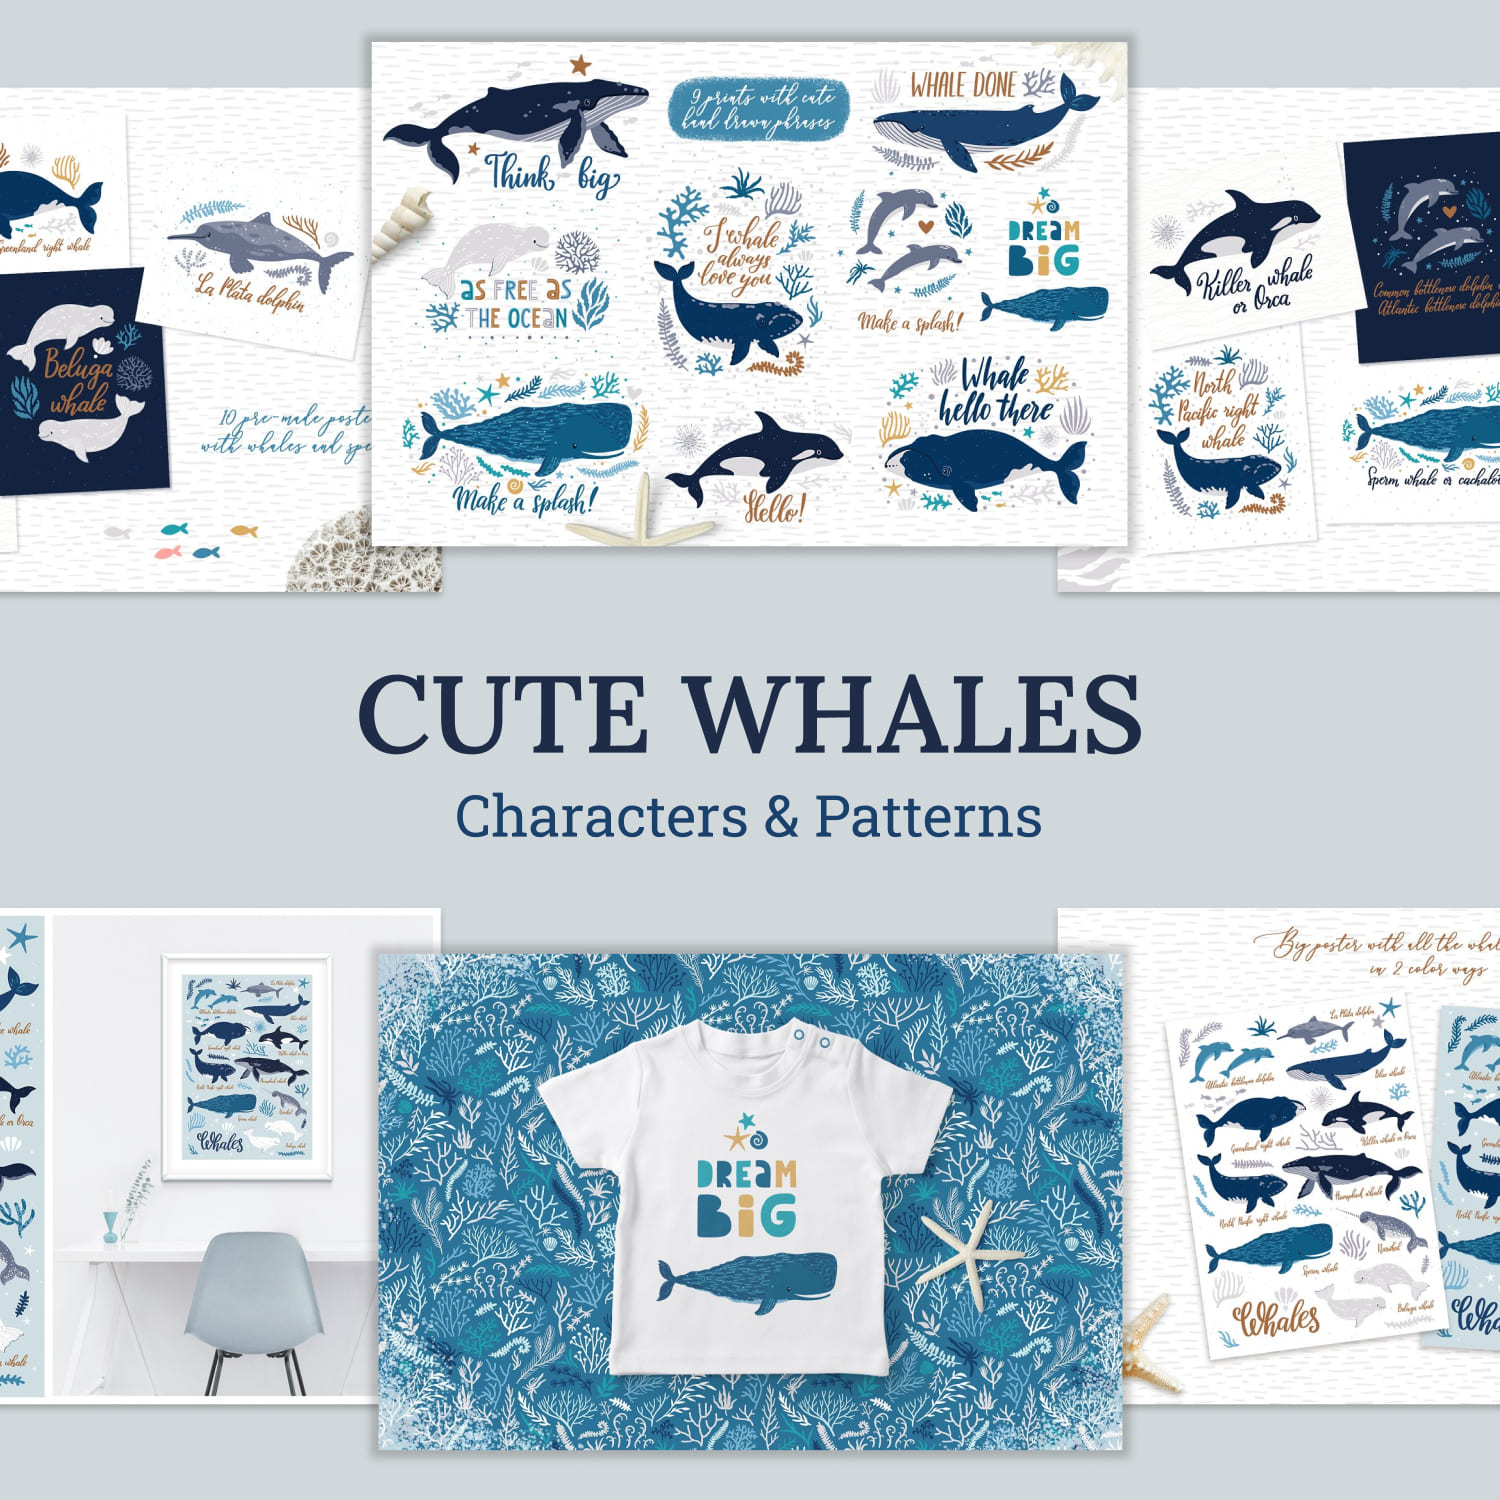 Cute Whales. Characters & Patterns cover image.